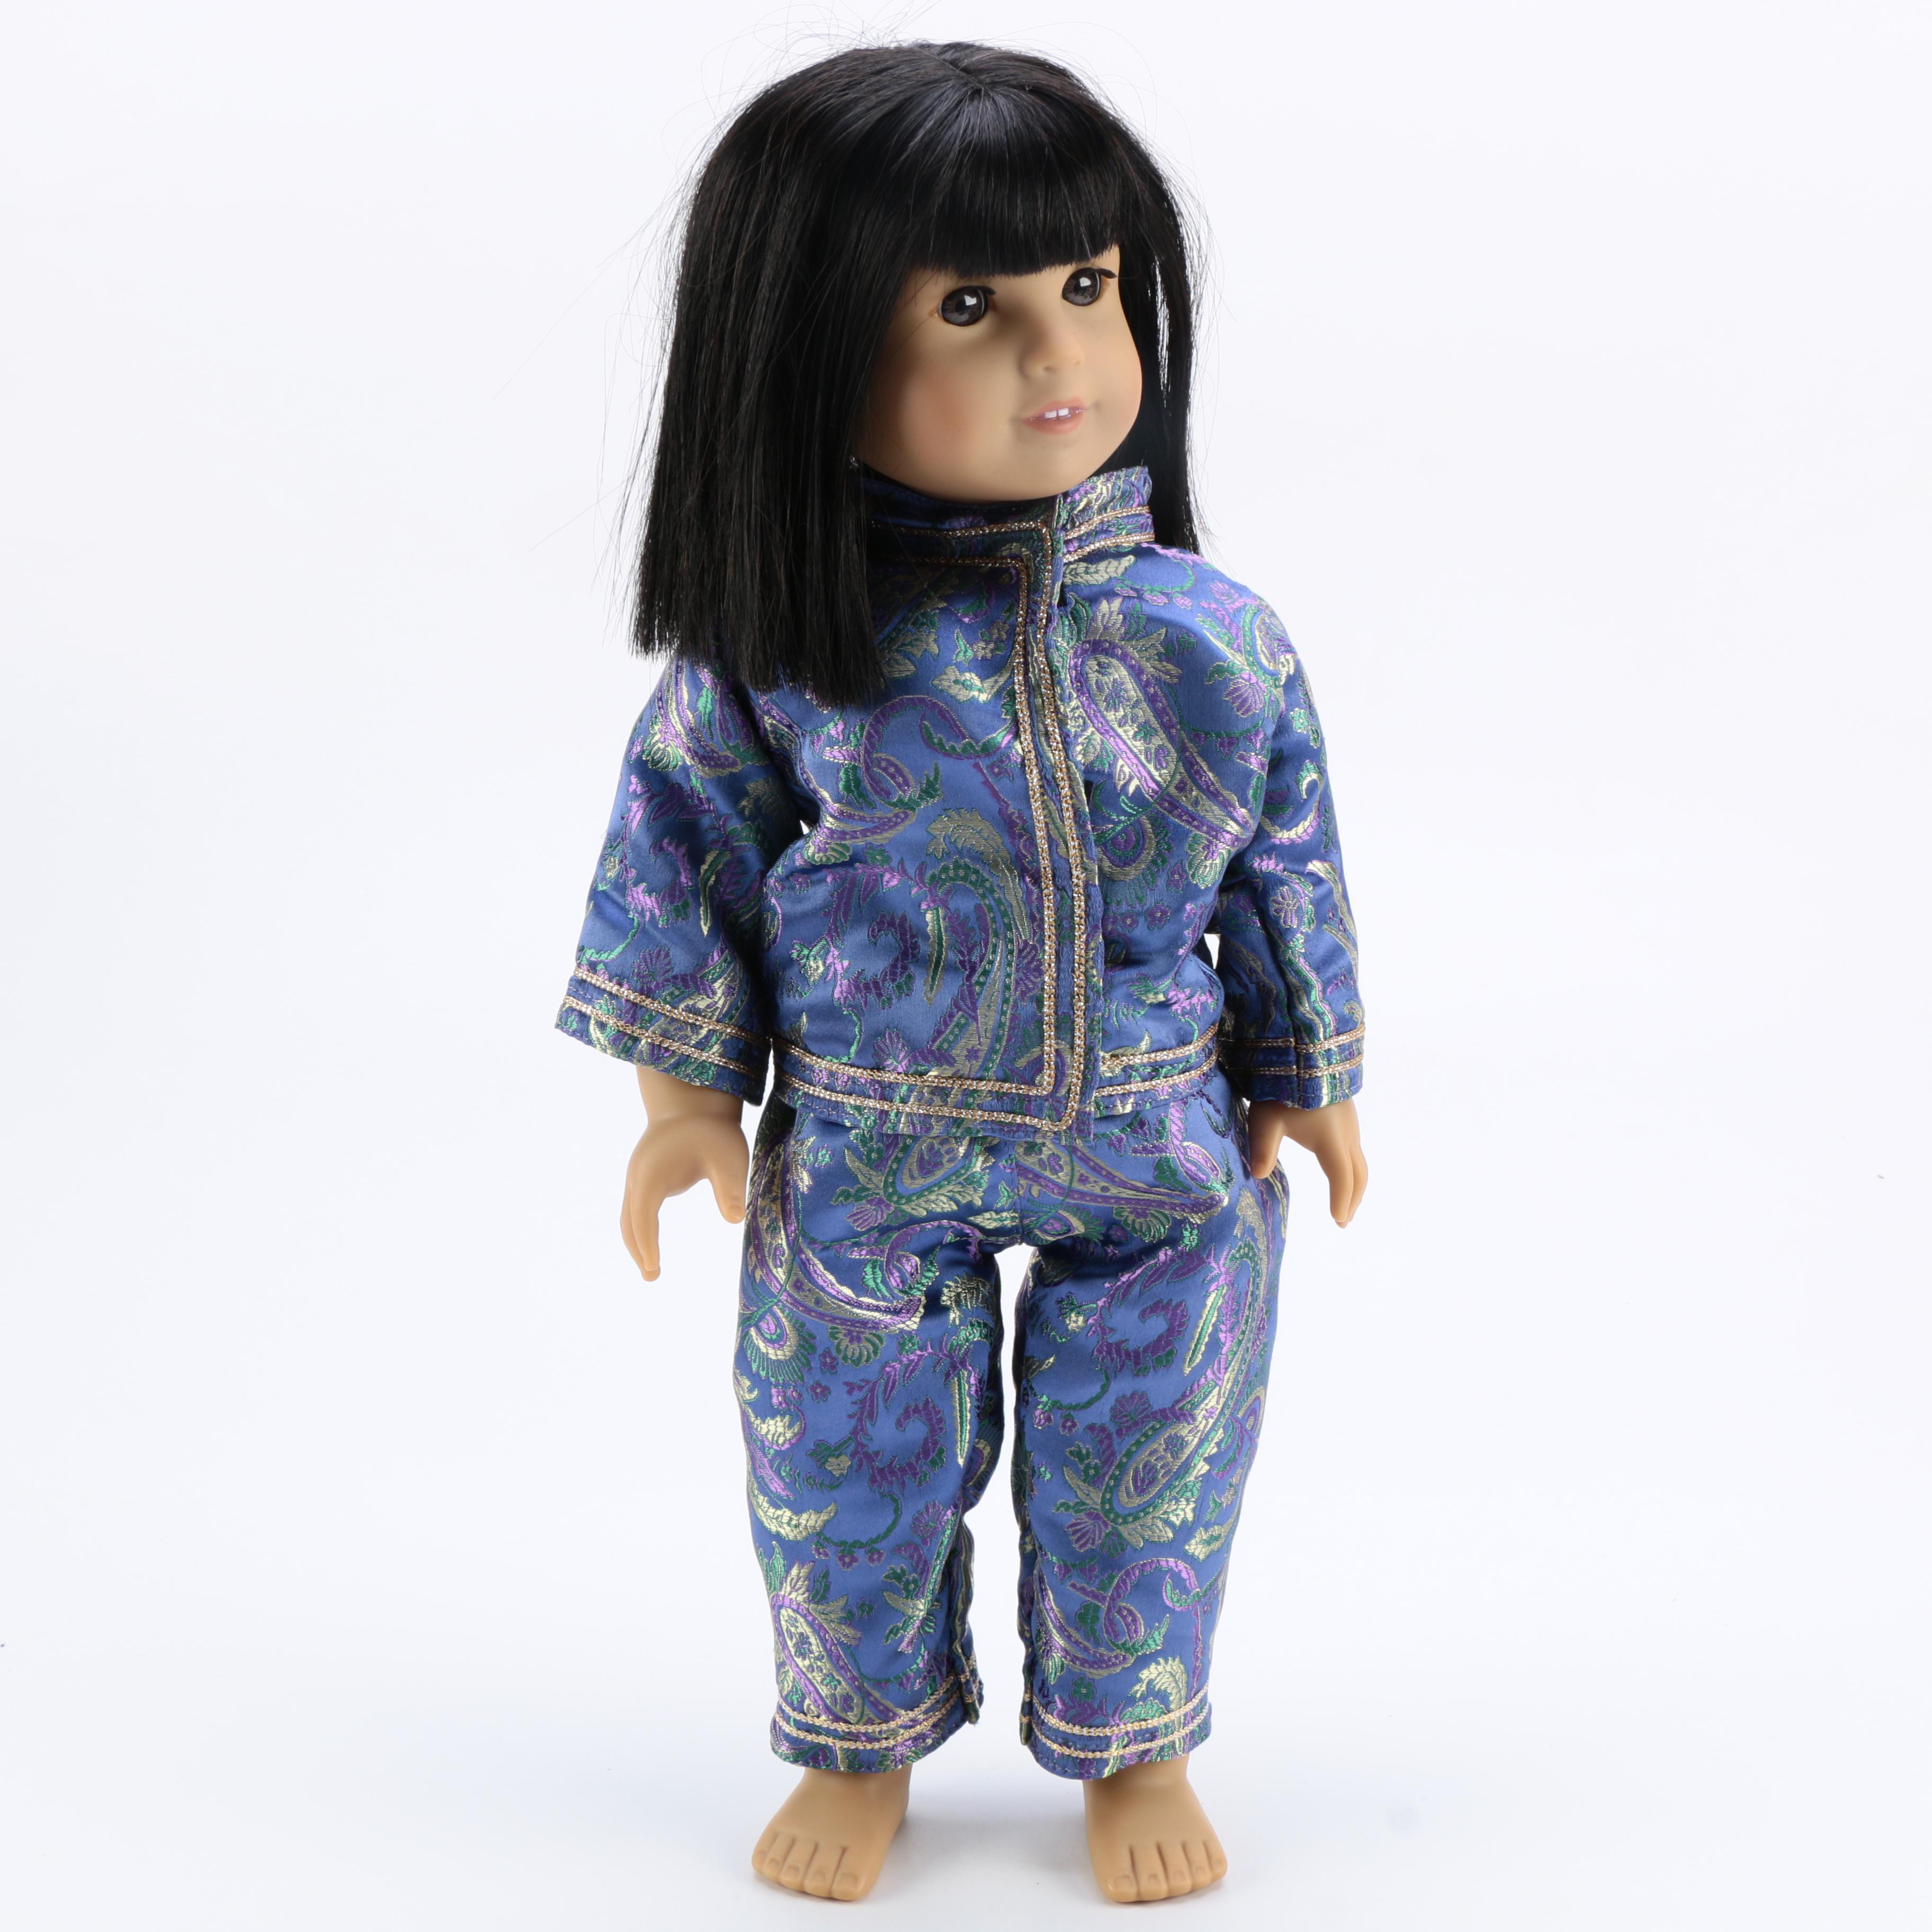 ivy ling doll